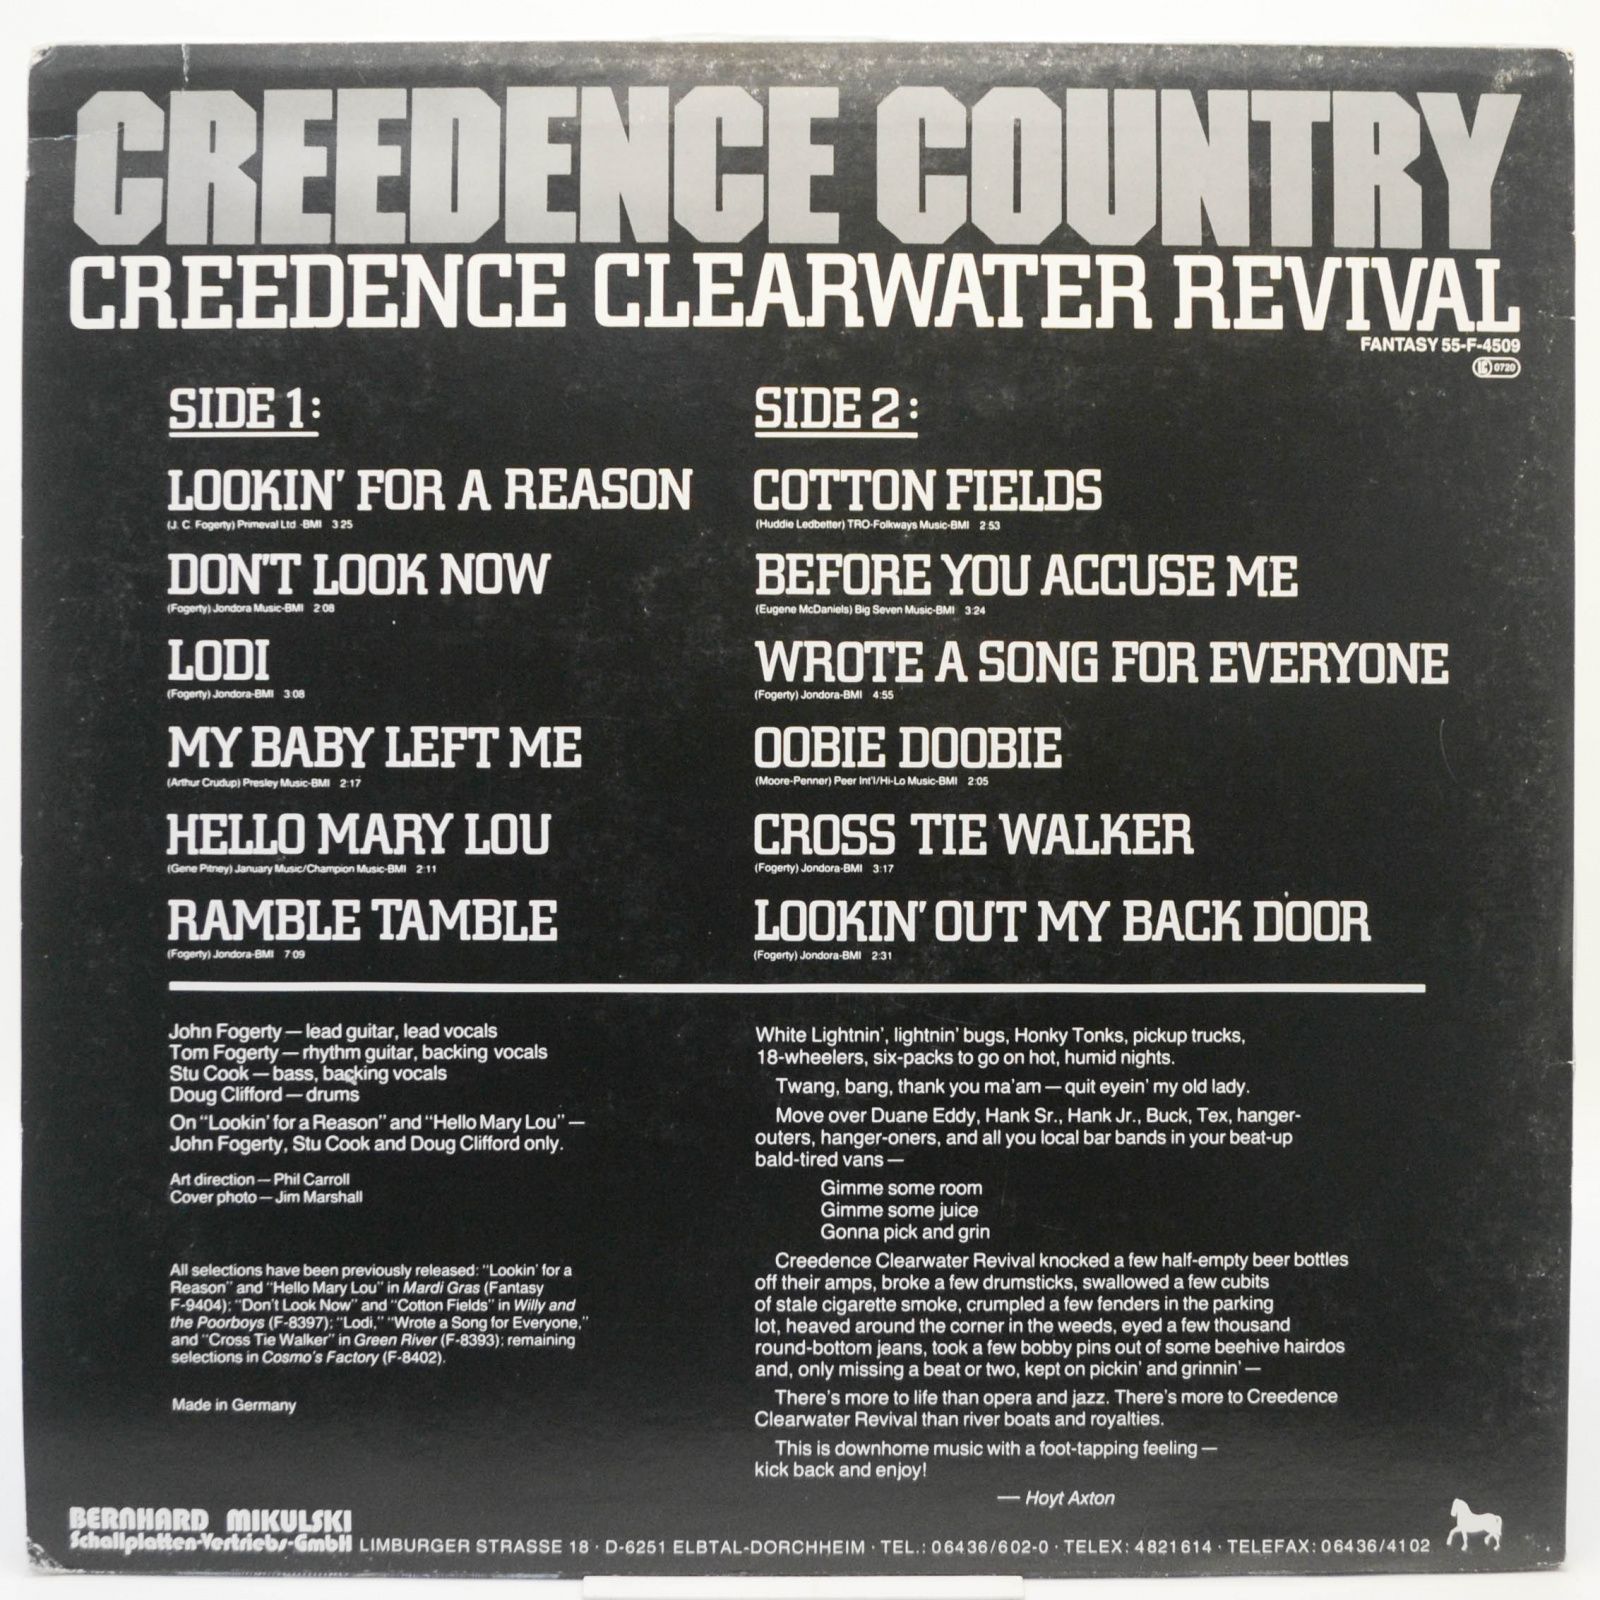 Creedence Clearwater Revival — Creedence Country, 1981